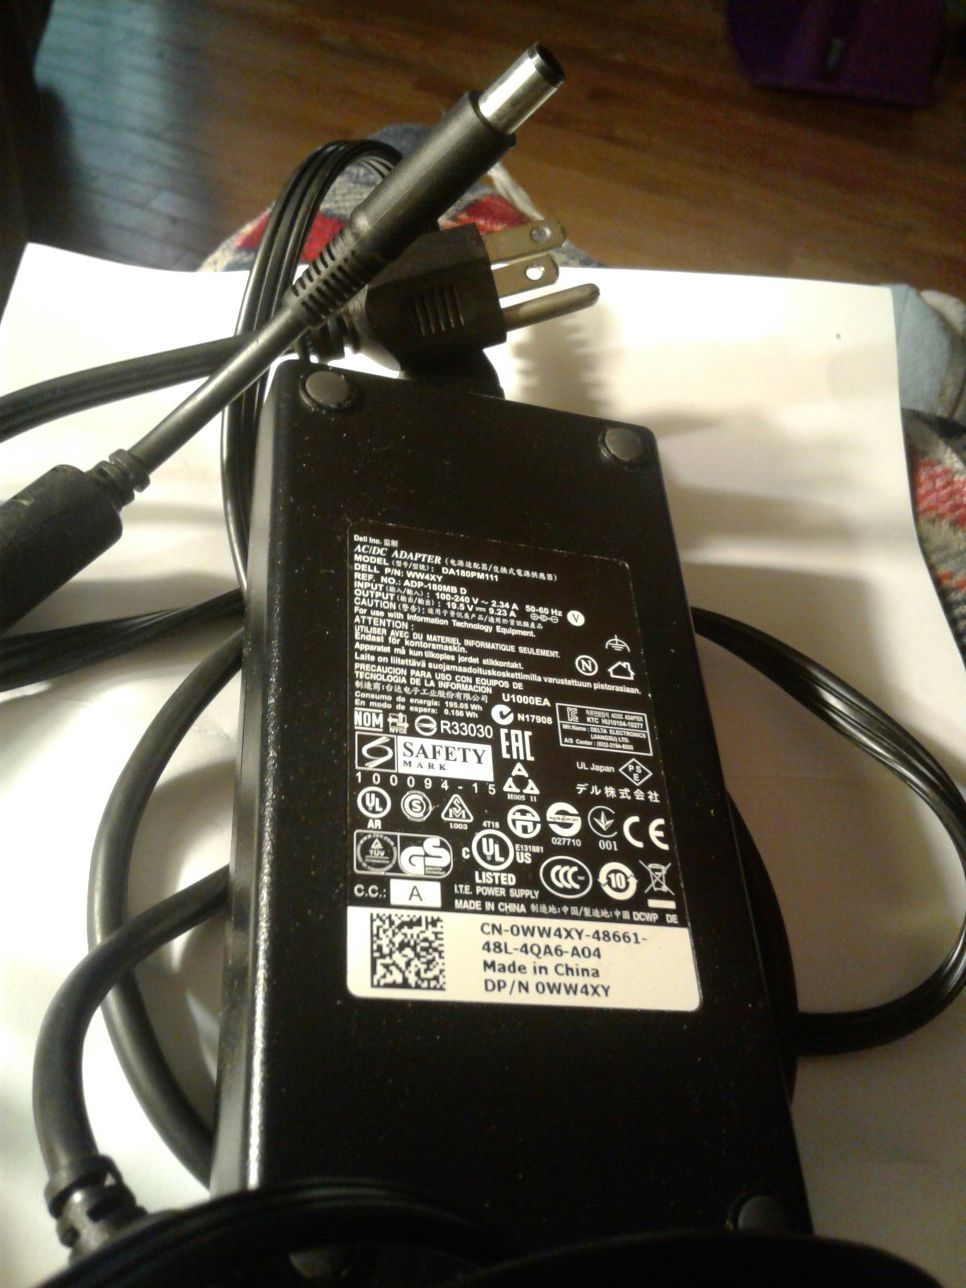 Genuine Dell Laptop Charger Power Adapter DA180PM111 ADP-180MB D ,0WW4XY, WW4XY